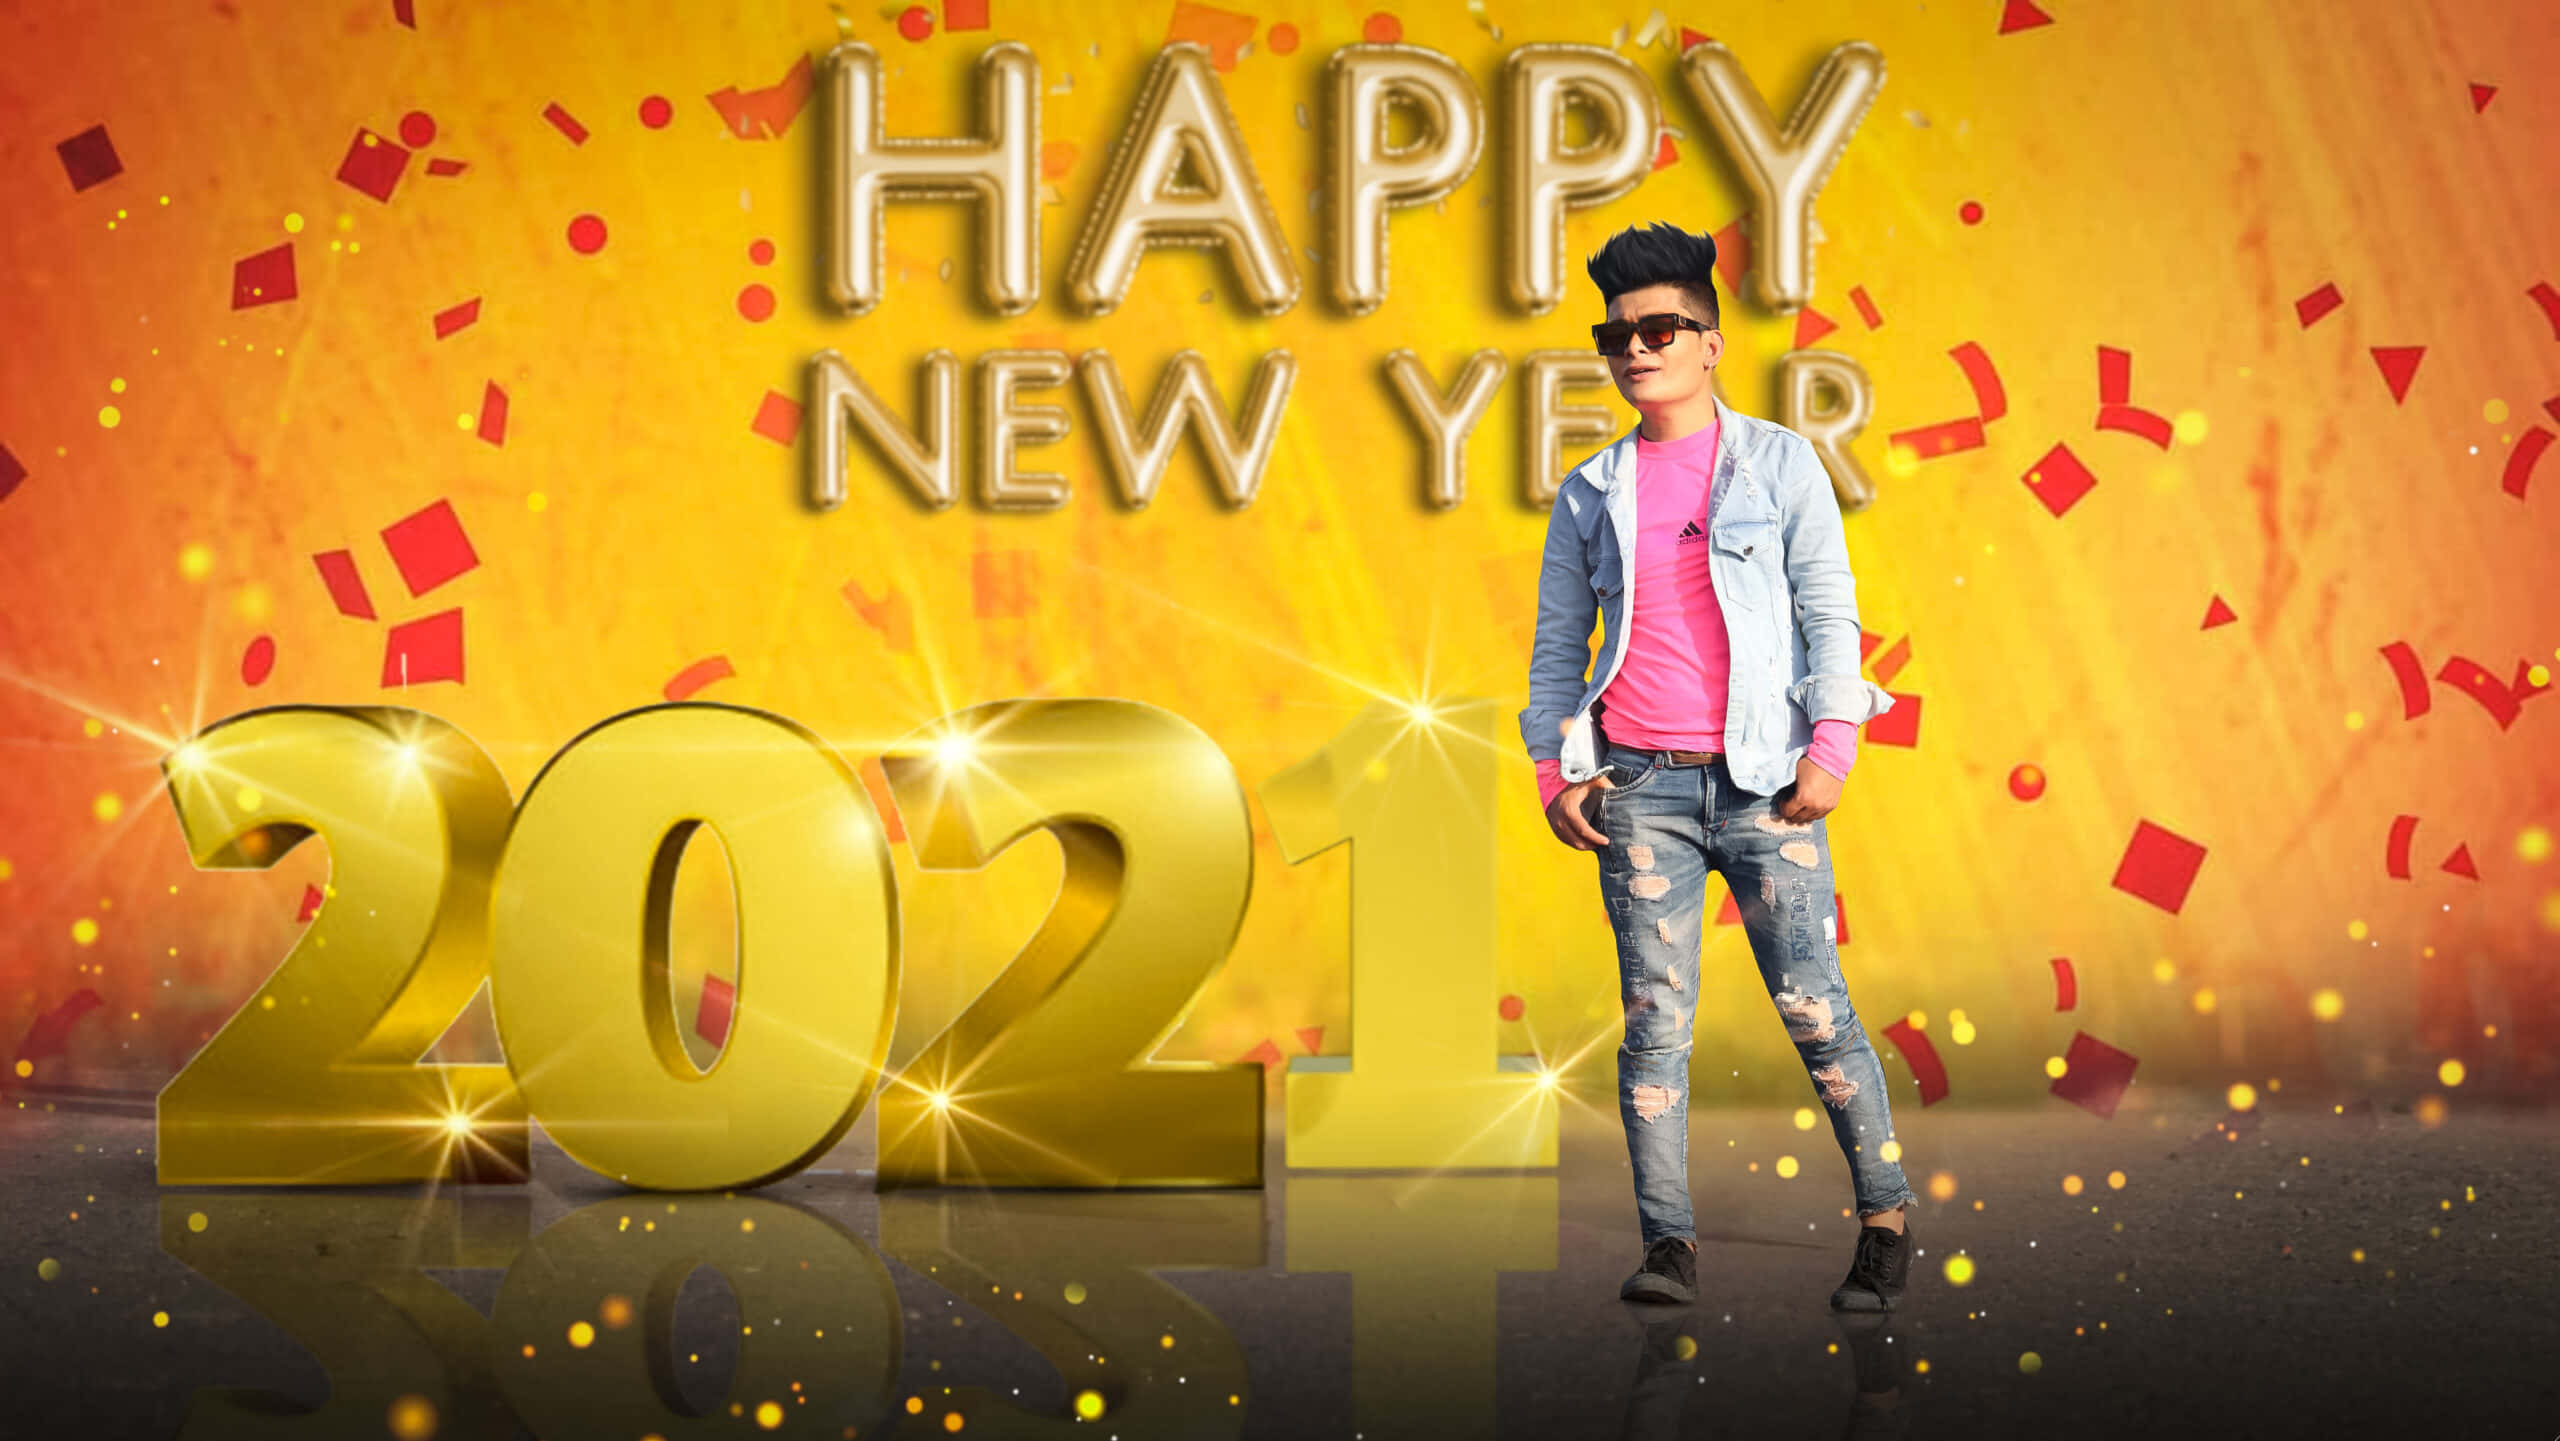 Happy New Year 2021 Hd Wallpapers